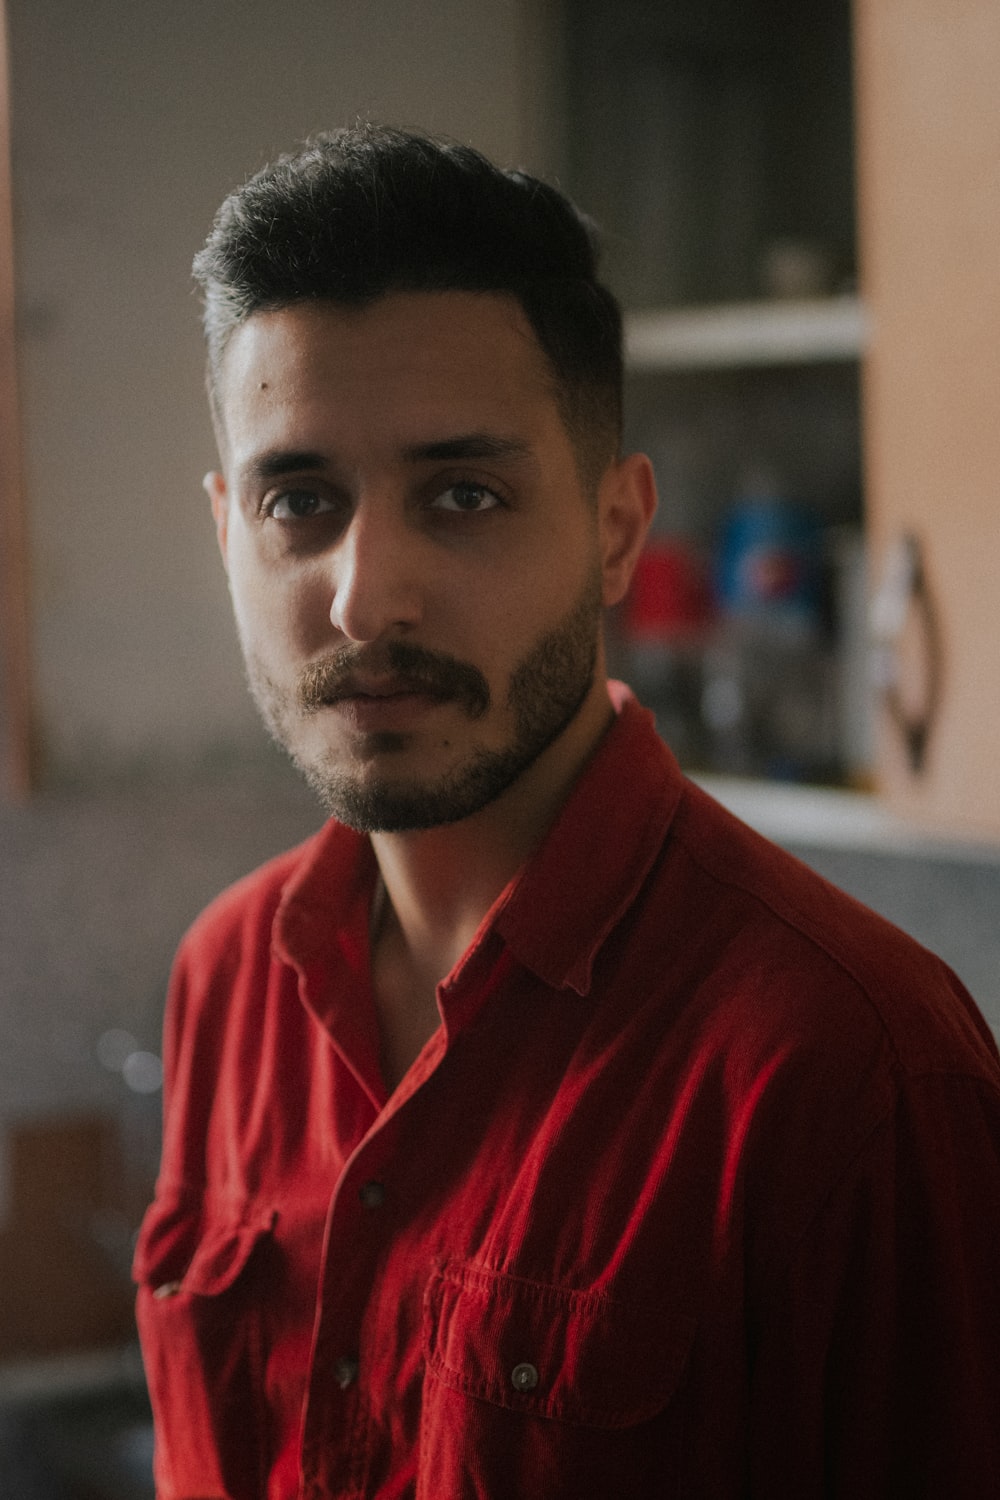 a man in a red shirt standing in a kitchen